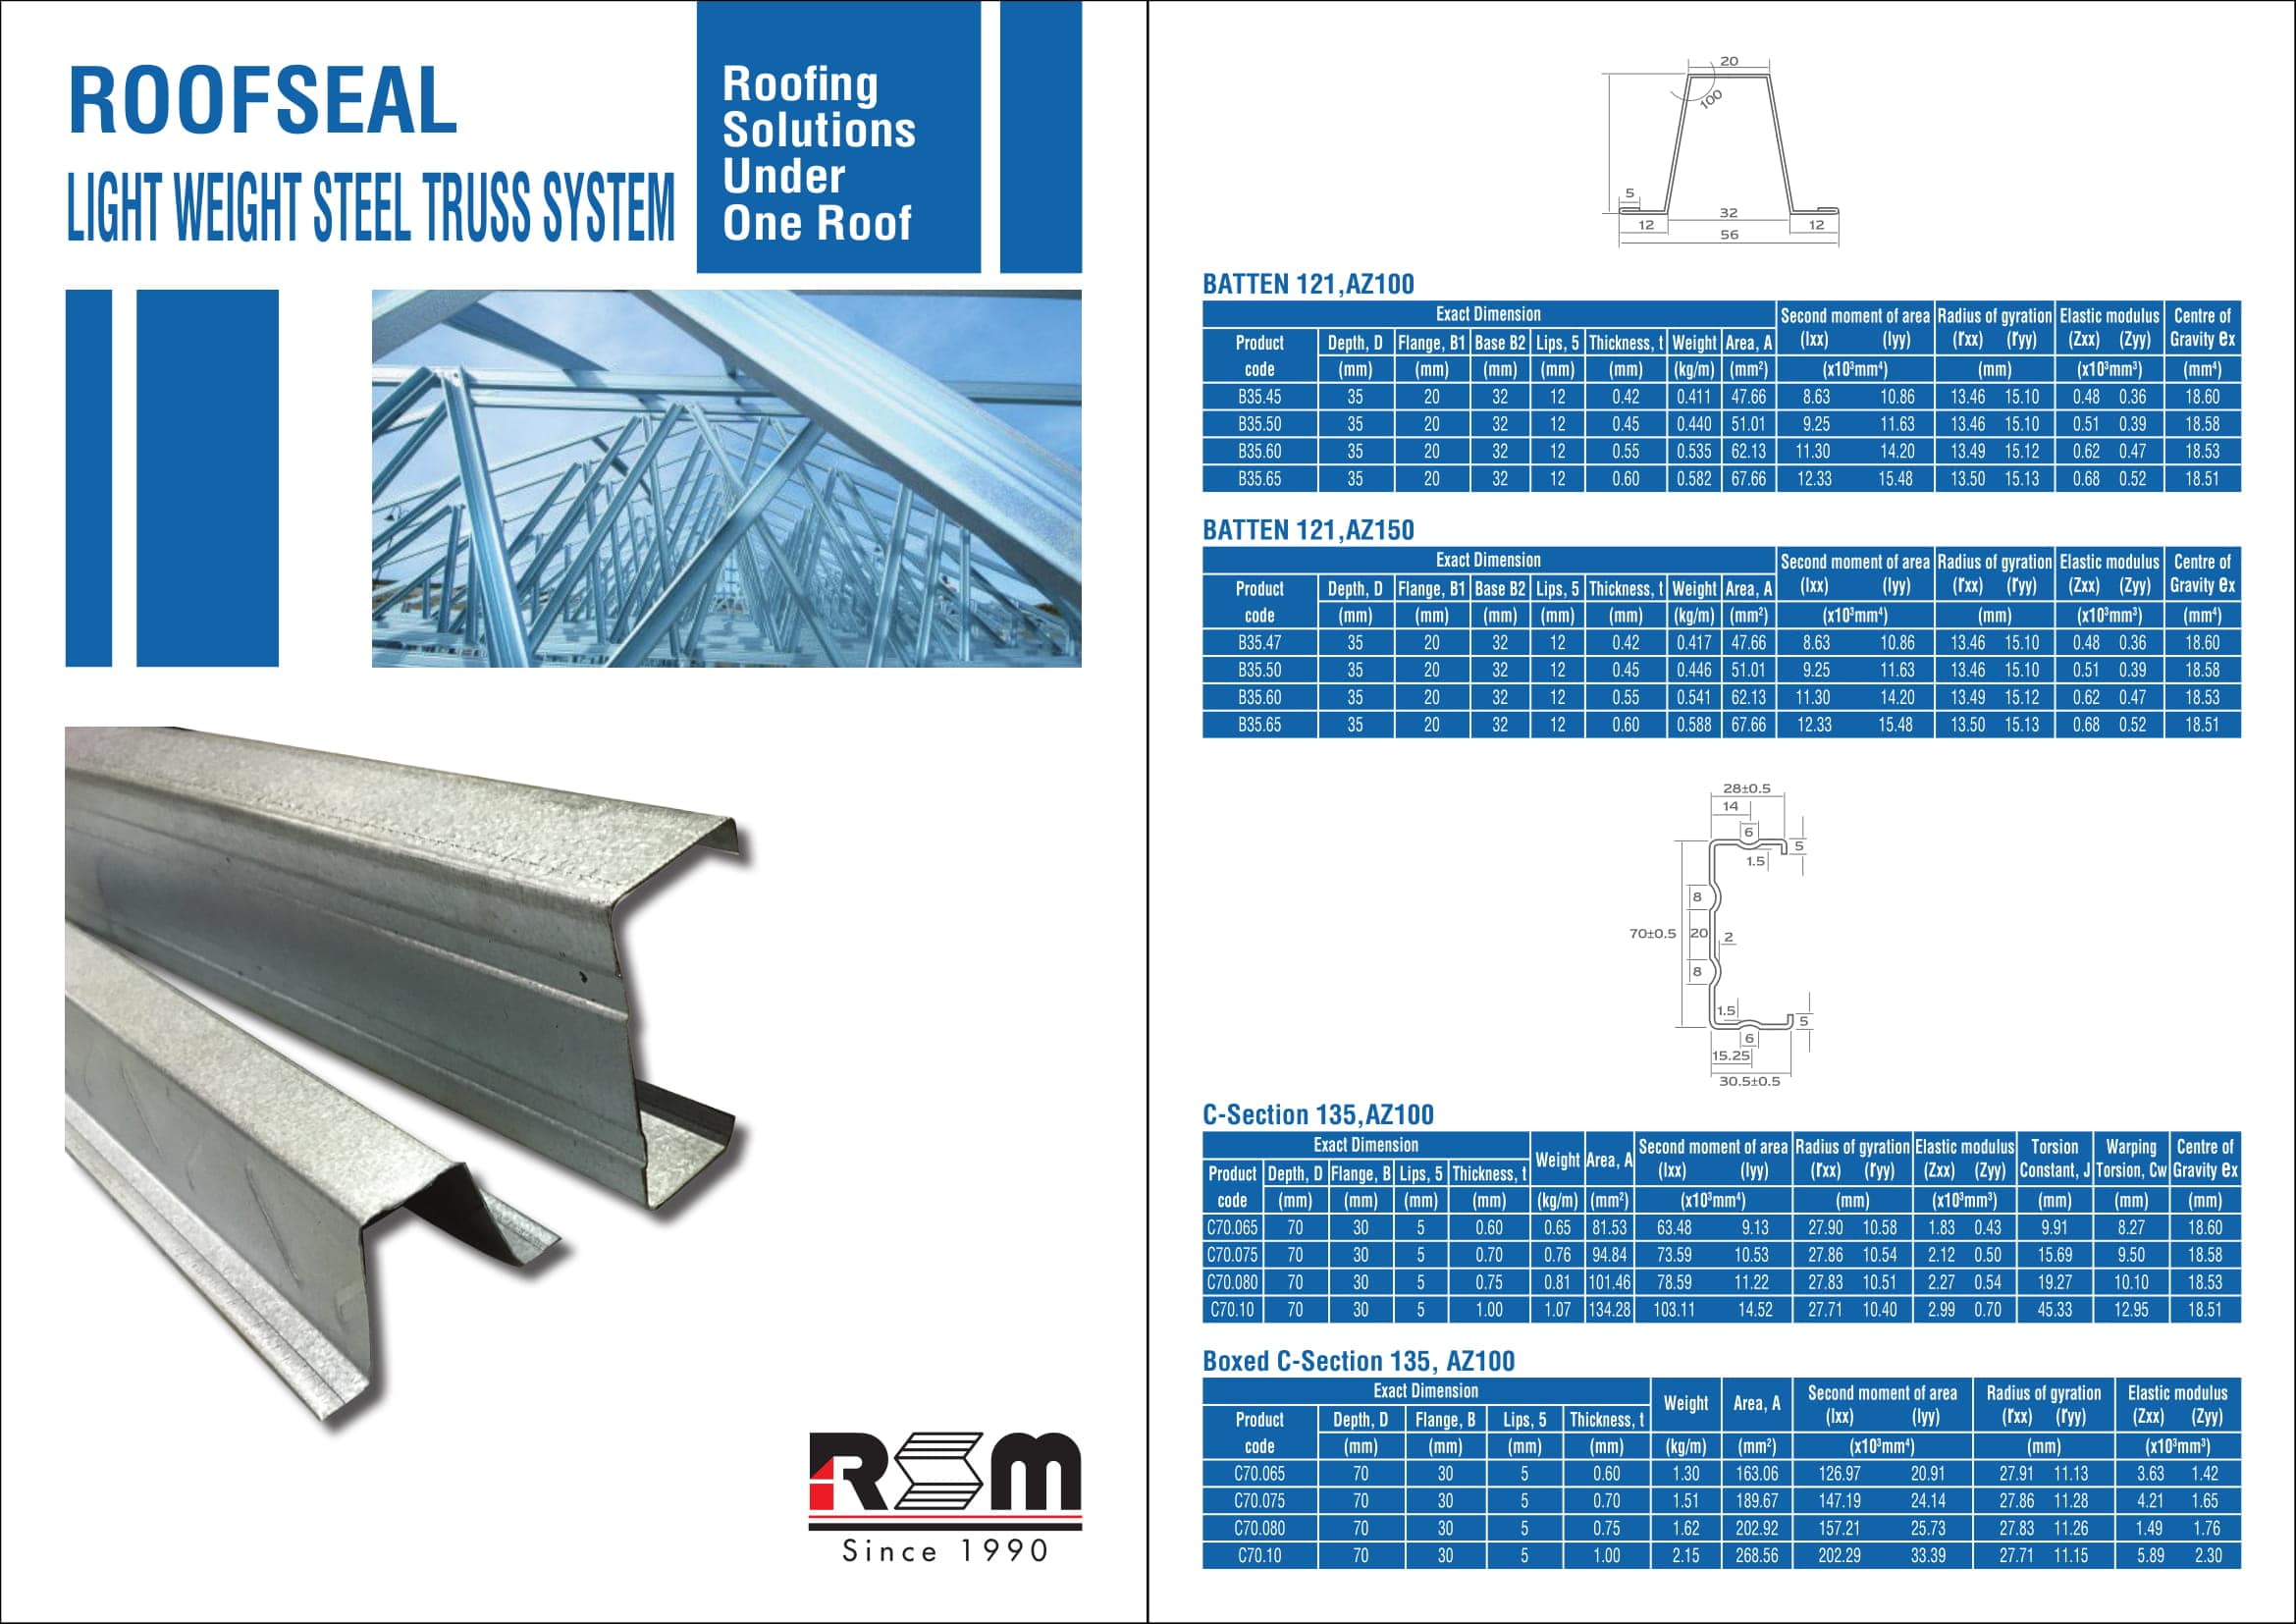 Roofseal Light Weight Steel Truss System